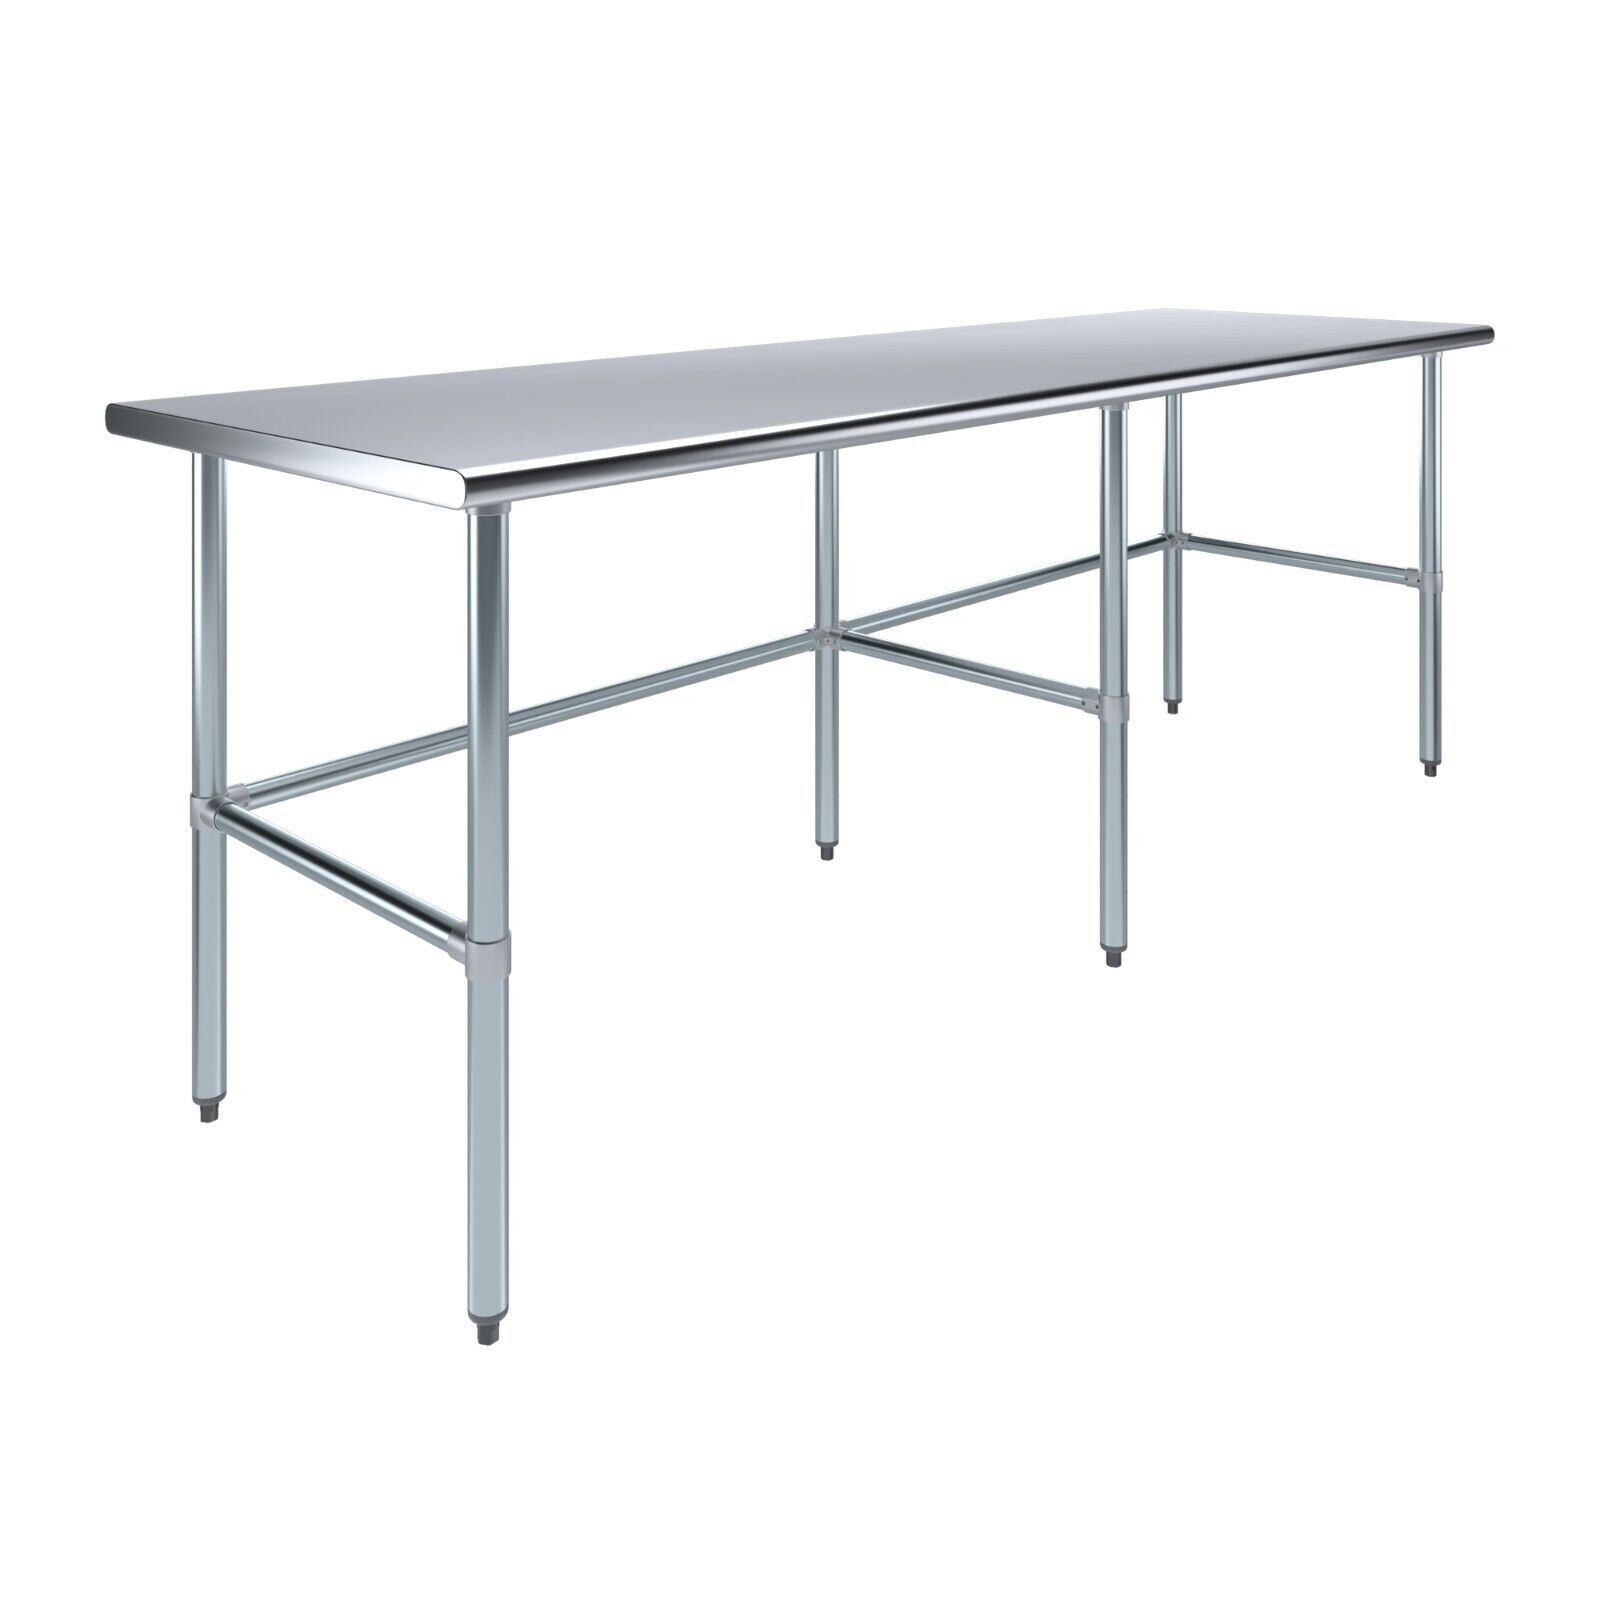 30 in. x 96 in. Open Base Stainless Steel Work Table | Residential & Commercial